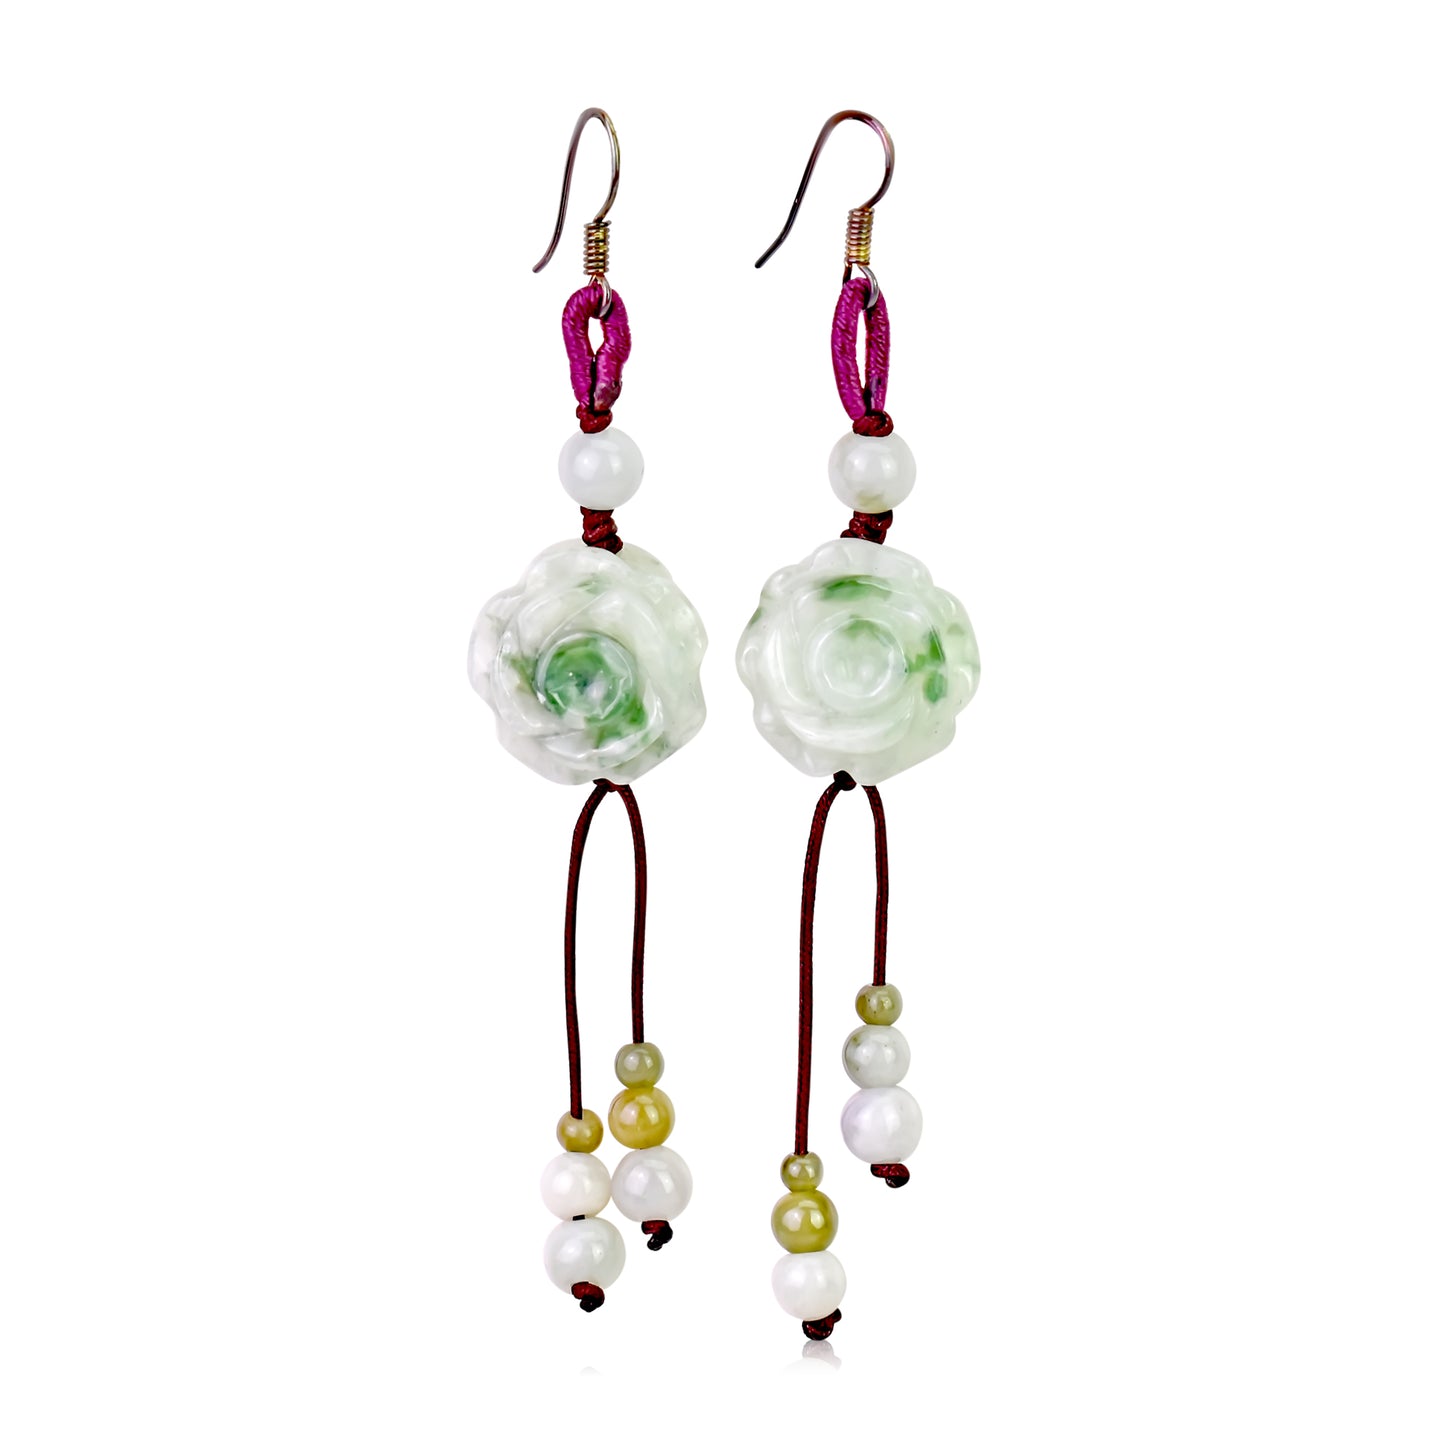 Feel Unique with the Stylish Handmade Rose Blossom Jade Earrings